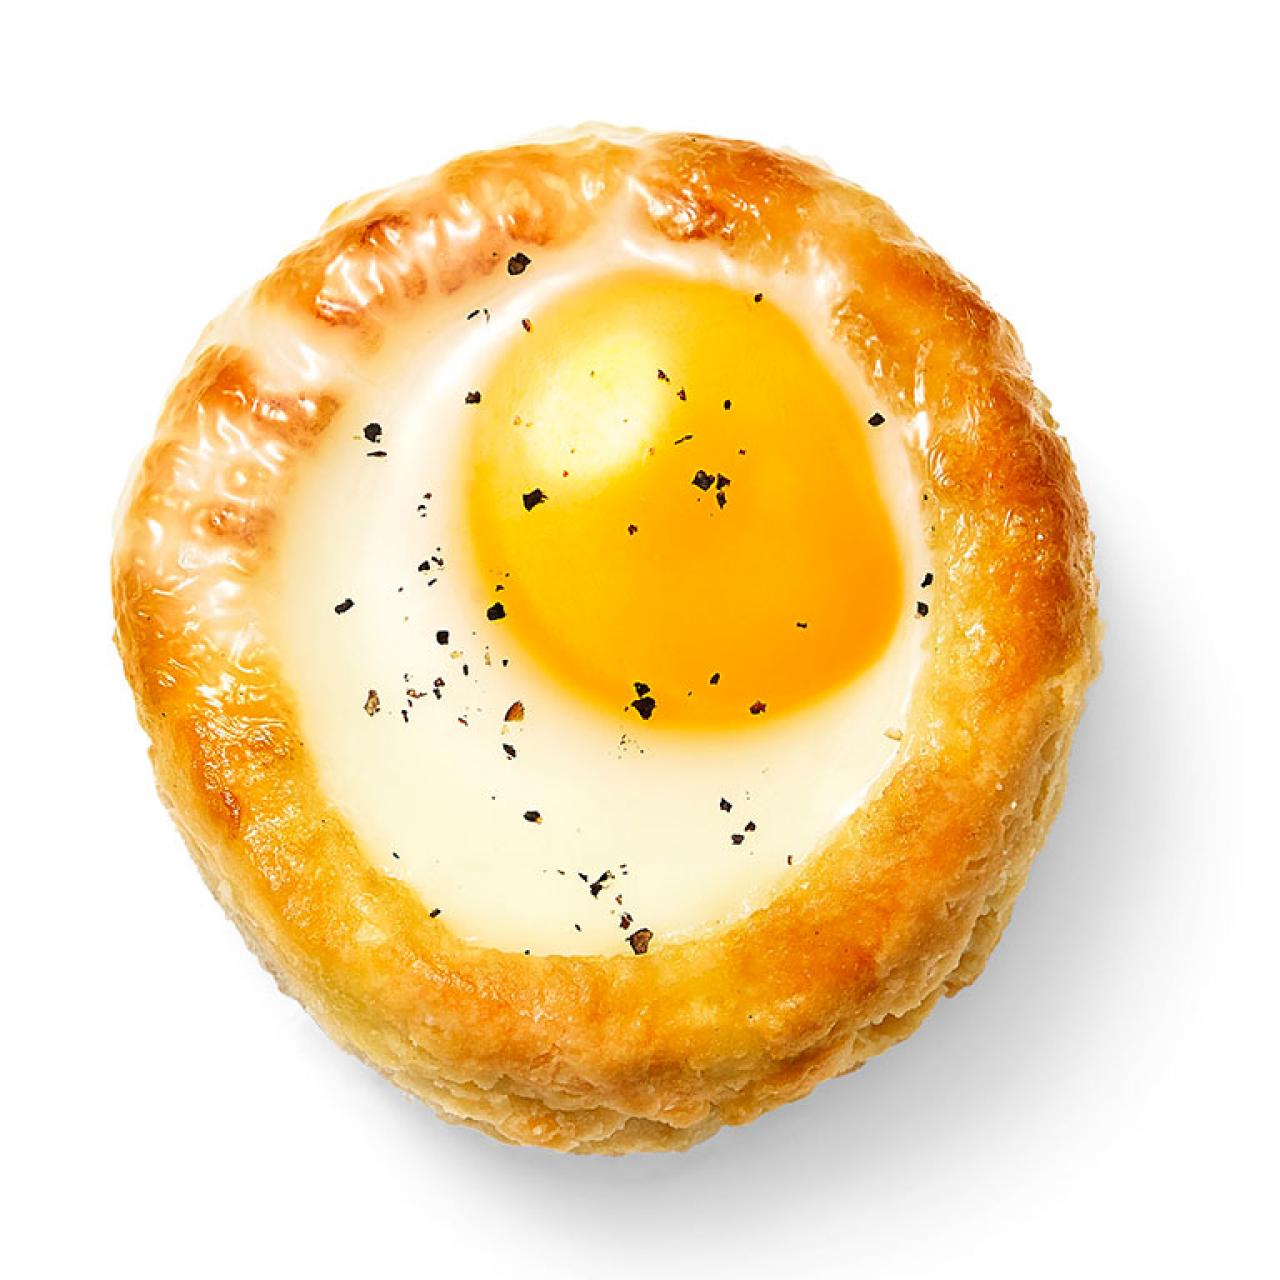 https://food.fnr.sndimg.com/content/dam/images/food/fullset/2022/02/16/0/FNM_030122-Biscuit-Egg-in-a-Hole_s4x3.jpg.rend.hgtvcom.1280.1280.suffix/1645023392562.jpeg